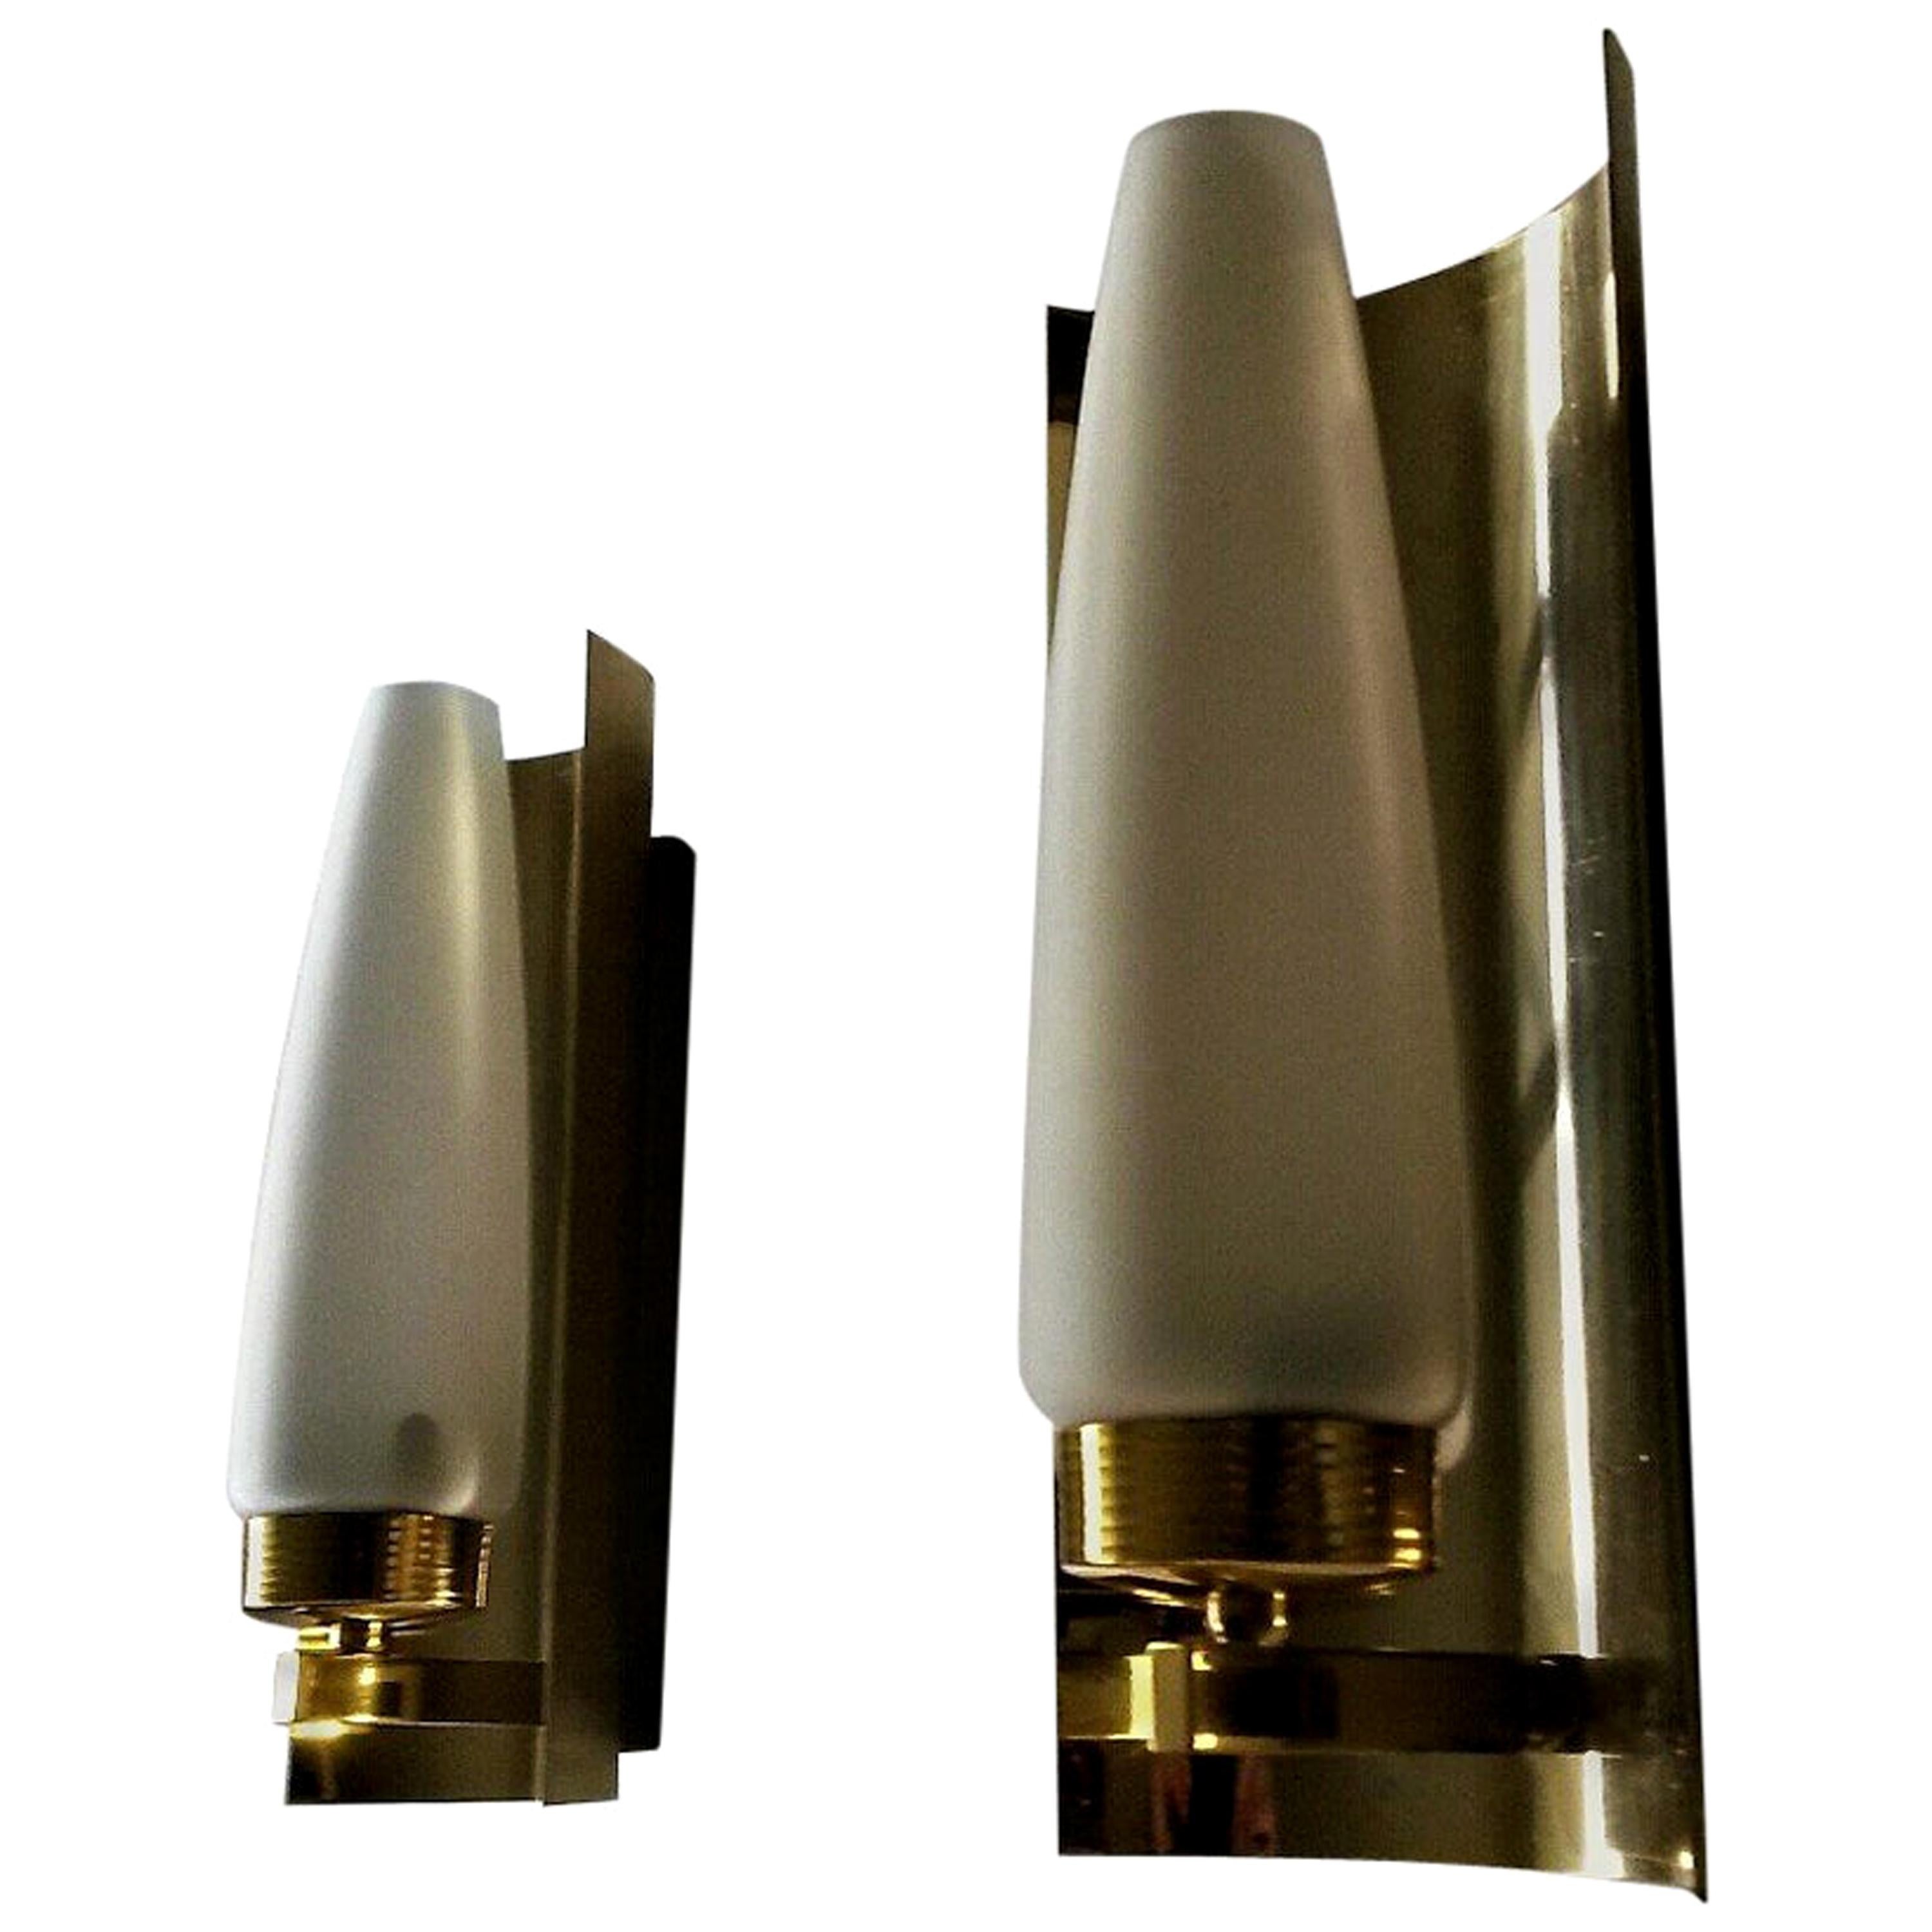 Elegant Pair of Mid-Century Modern French Sconces by Maison Arlus For Sale